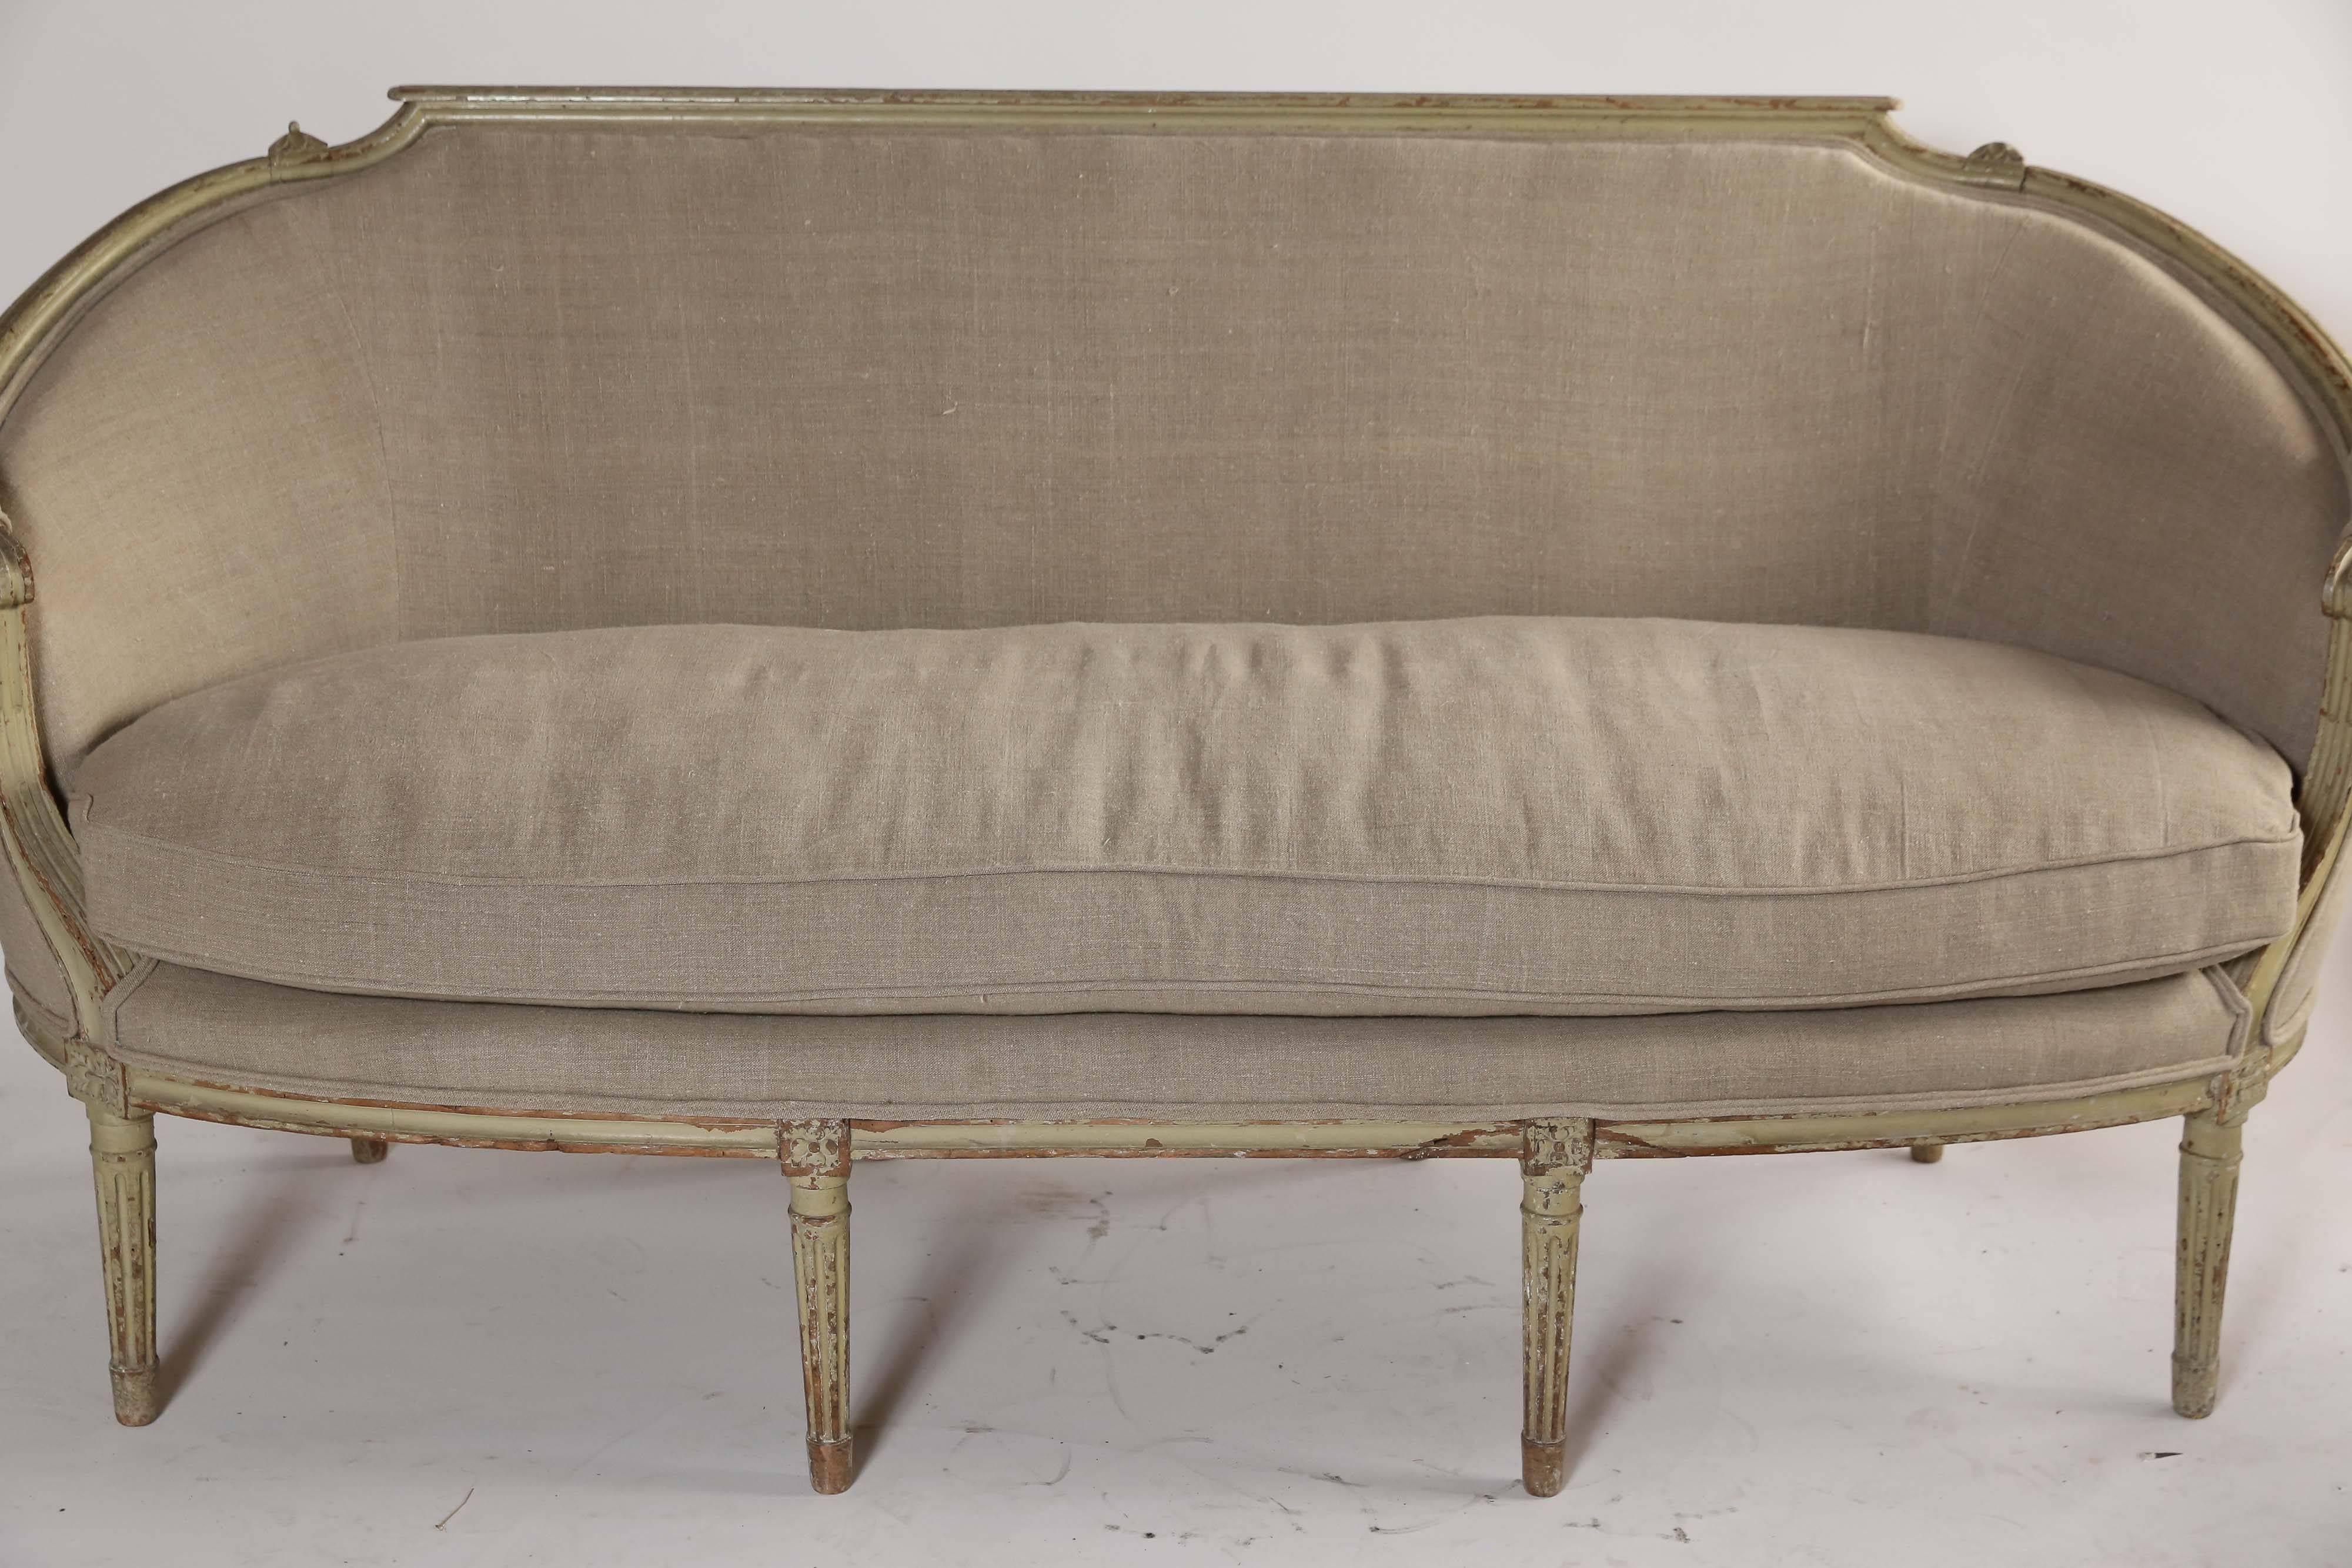 Graceful curved lines on a Classic French settee. With traces of it's original pale green paint and newly upholstered in linen, this delightful piece has double cord welting on the frame and a new down-filled cushion. Light and elegant.